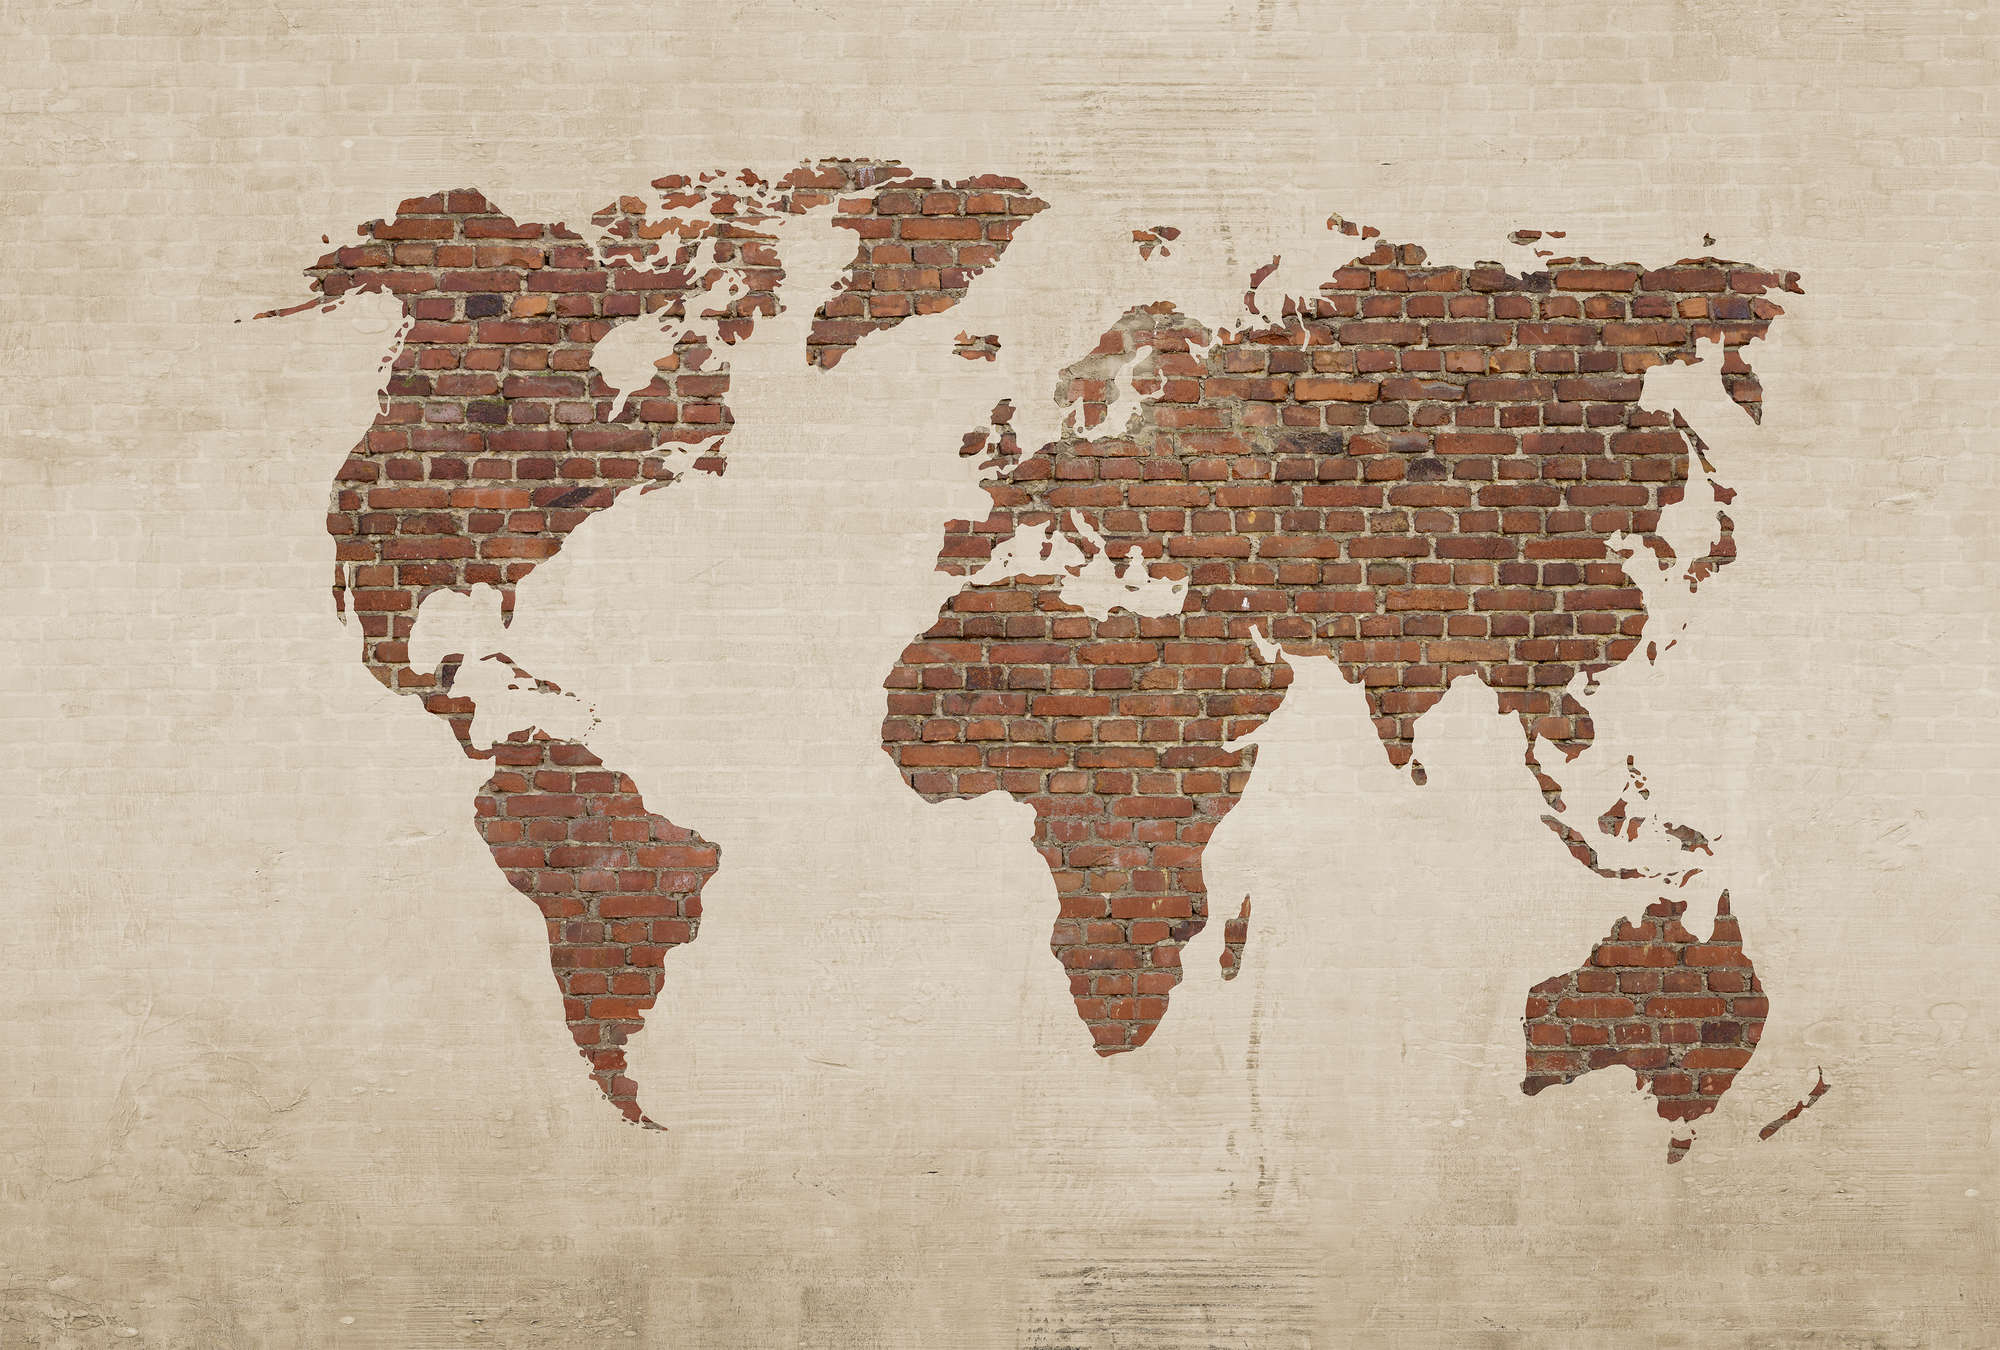             Photo wallpaper with wall optics and world map - cream, brown
        